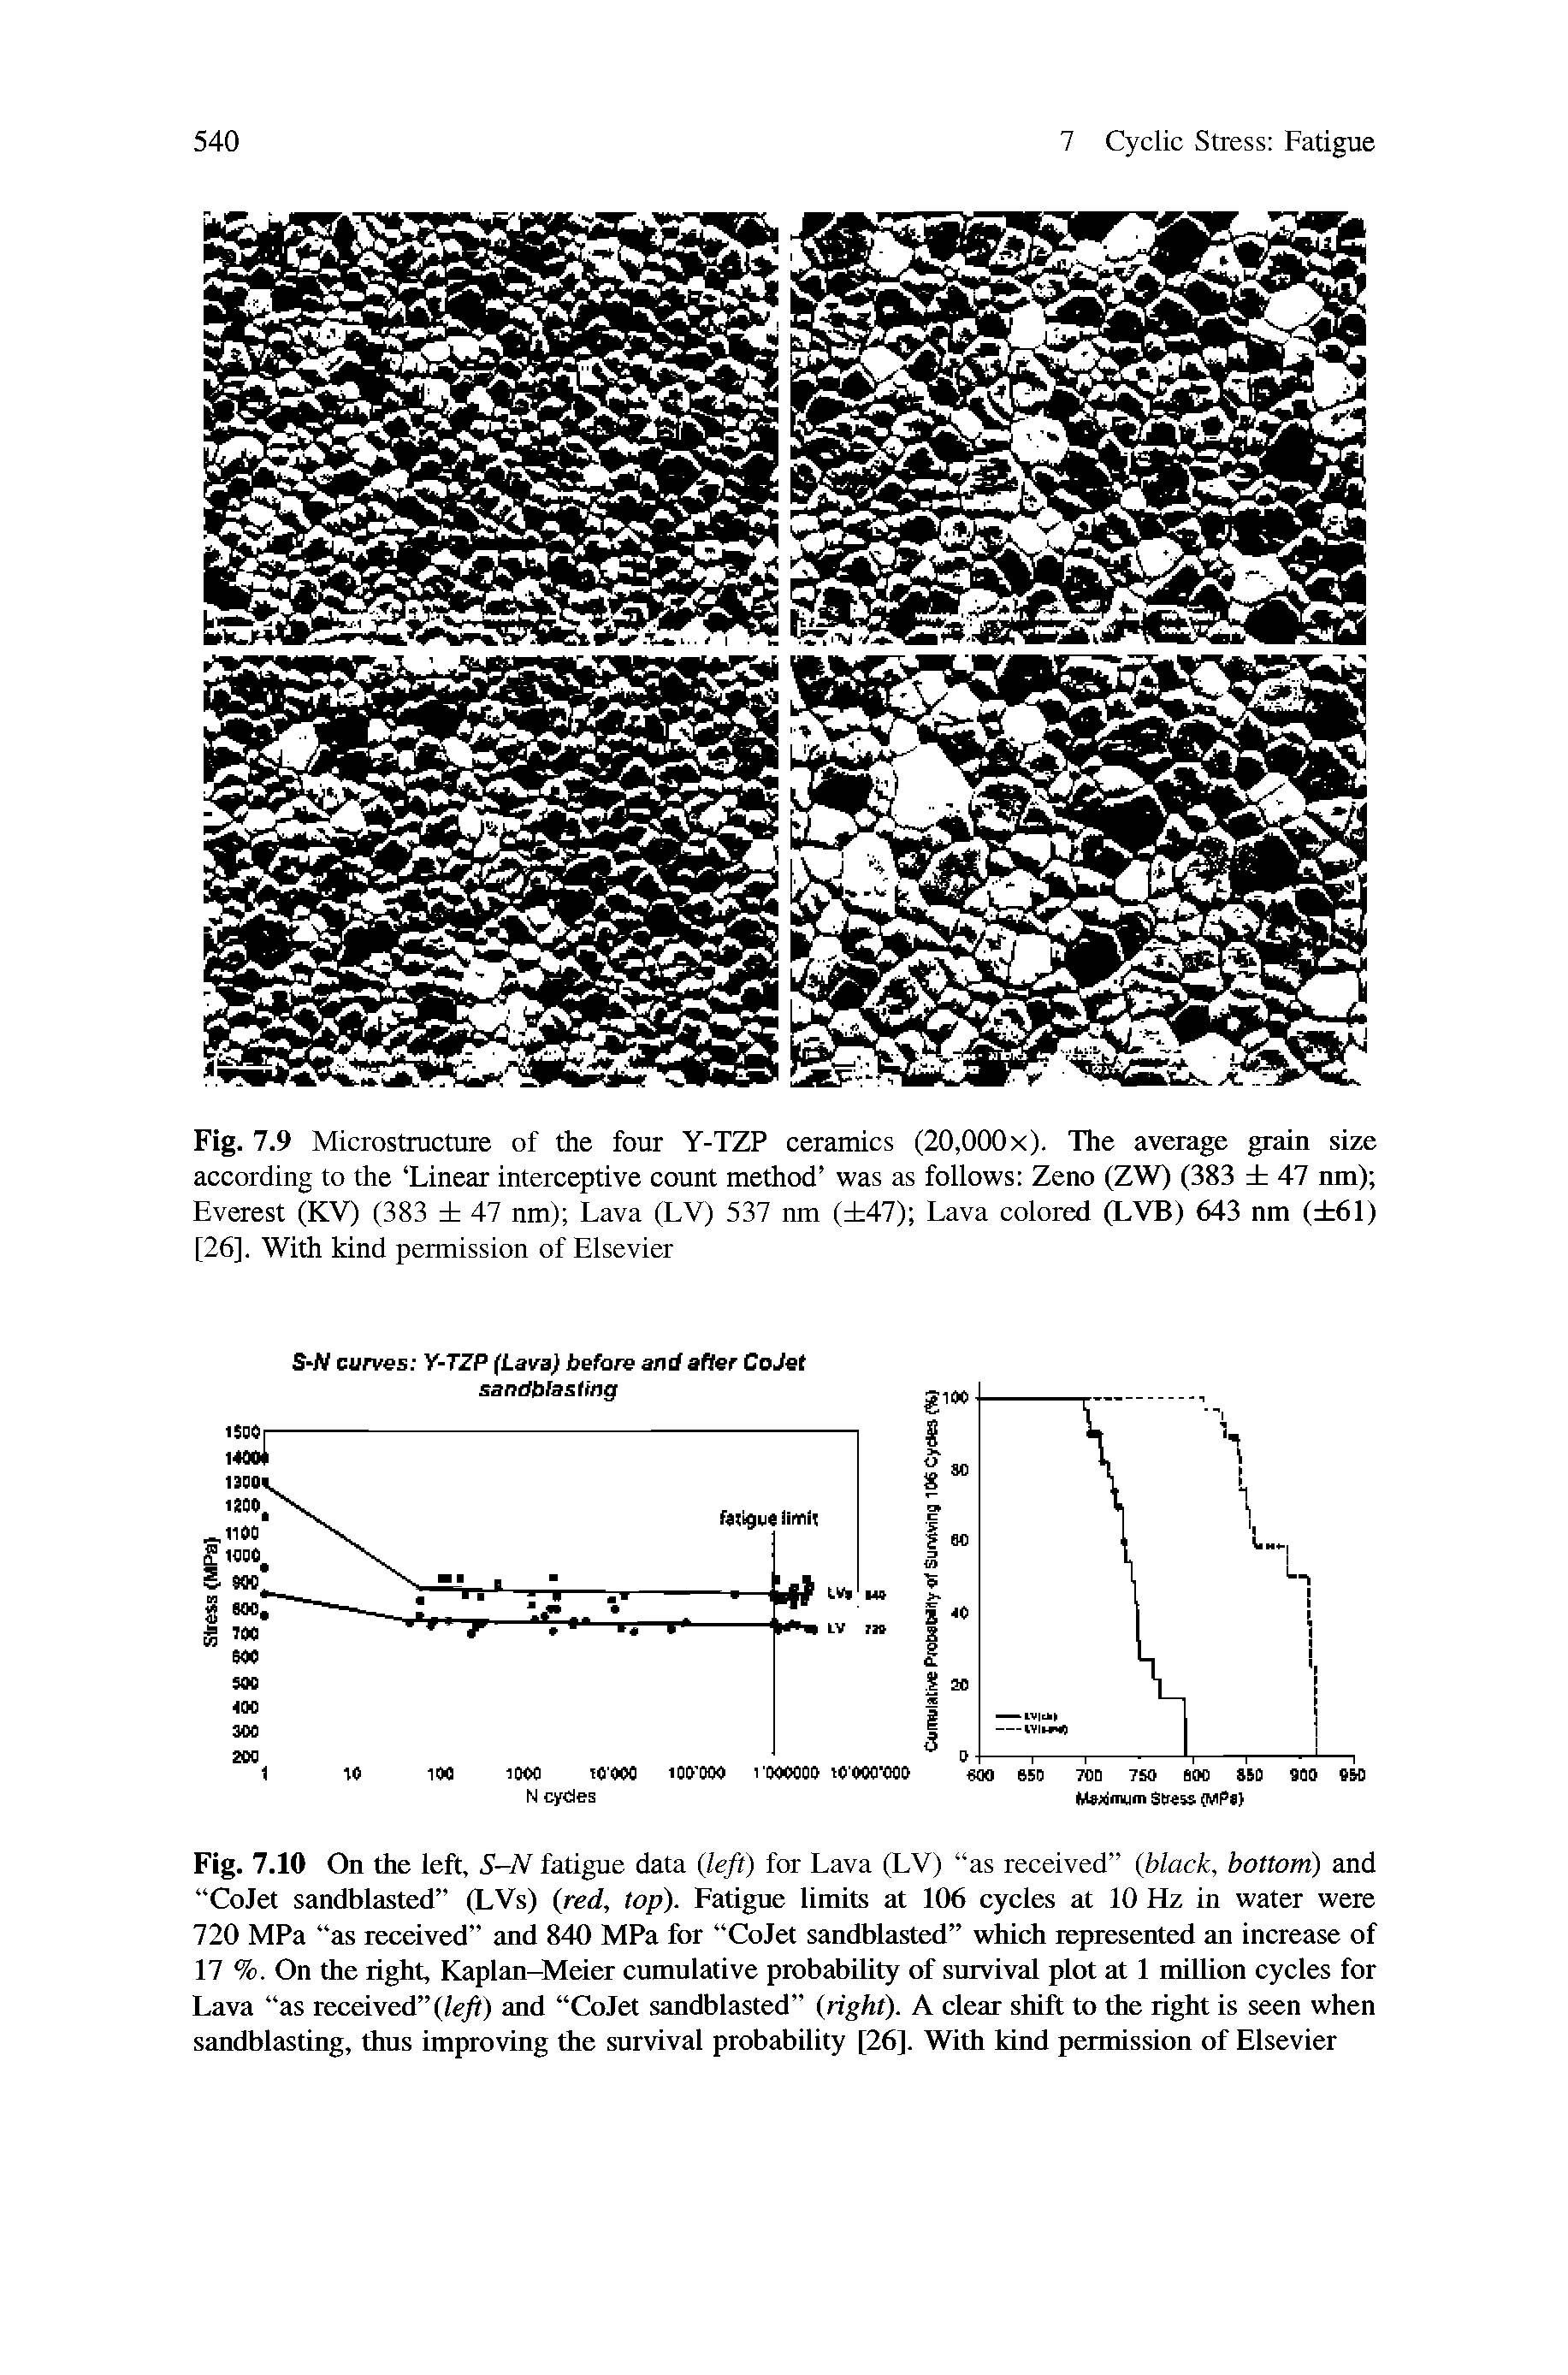 Fig. 7.9 Microstructure of the four Y-TZP ceramics (20,000x). The average grain size according to the Linear interceptive count method was as follows Zeno (ZW) (383 47 nm) Everest (KV) (383 47 nm) Lava (LV) 537 nm ( 47) Lava colored (LVB) 643 nm ( 61) [26], With kind permission of Elsevier...